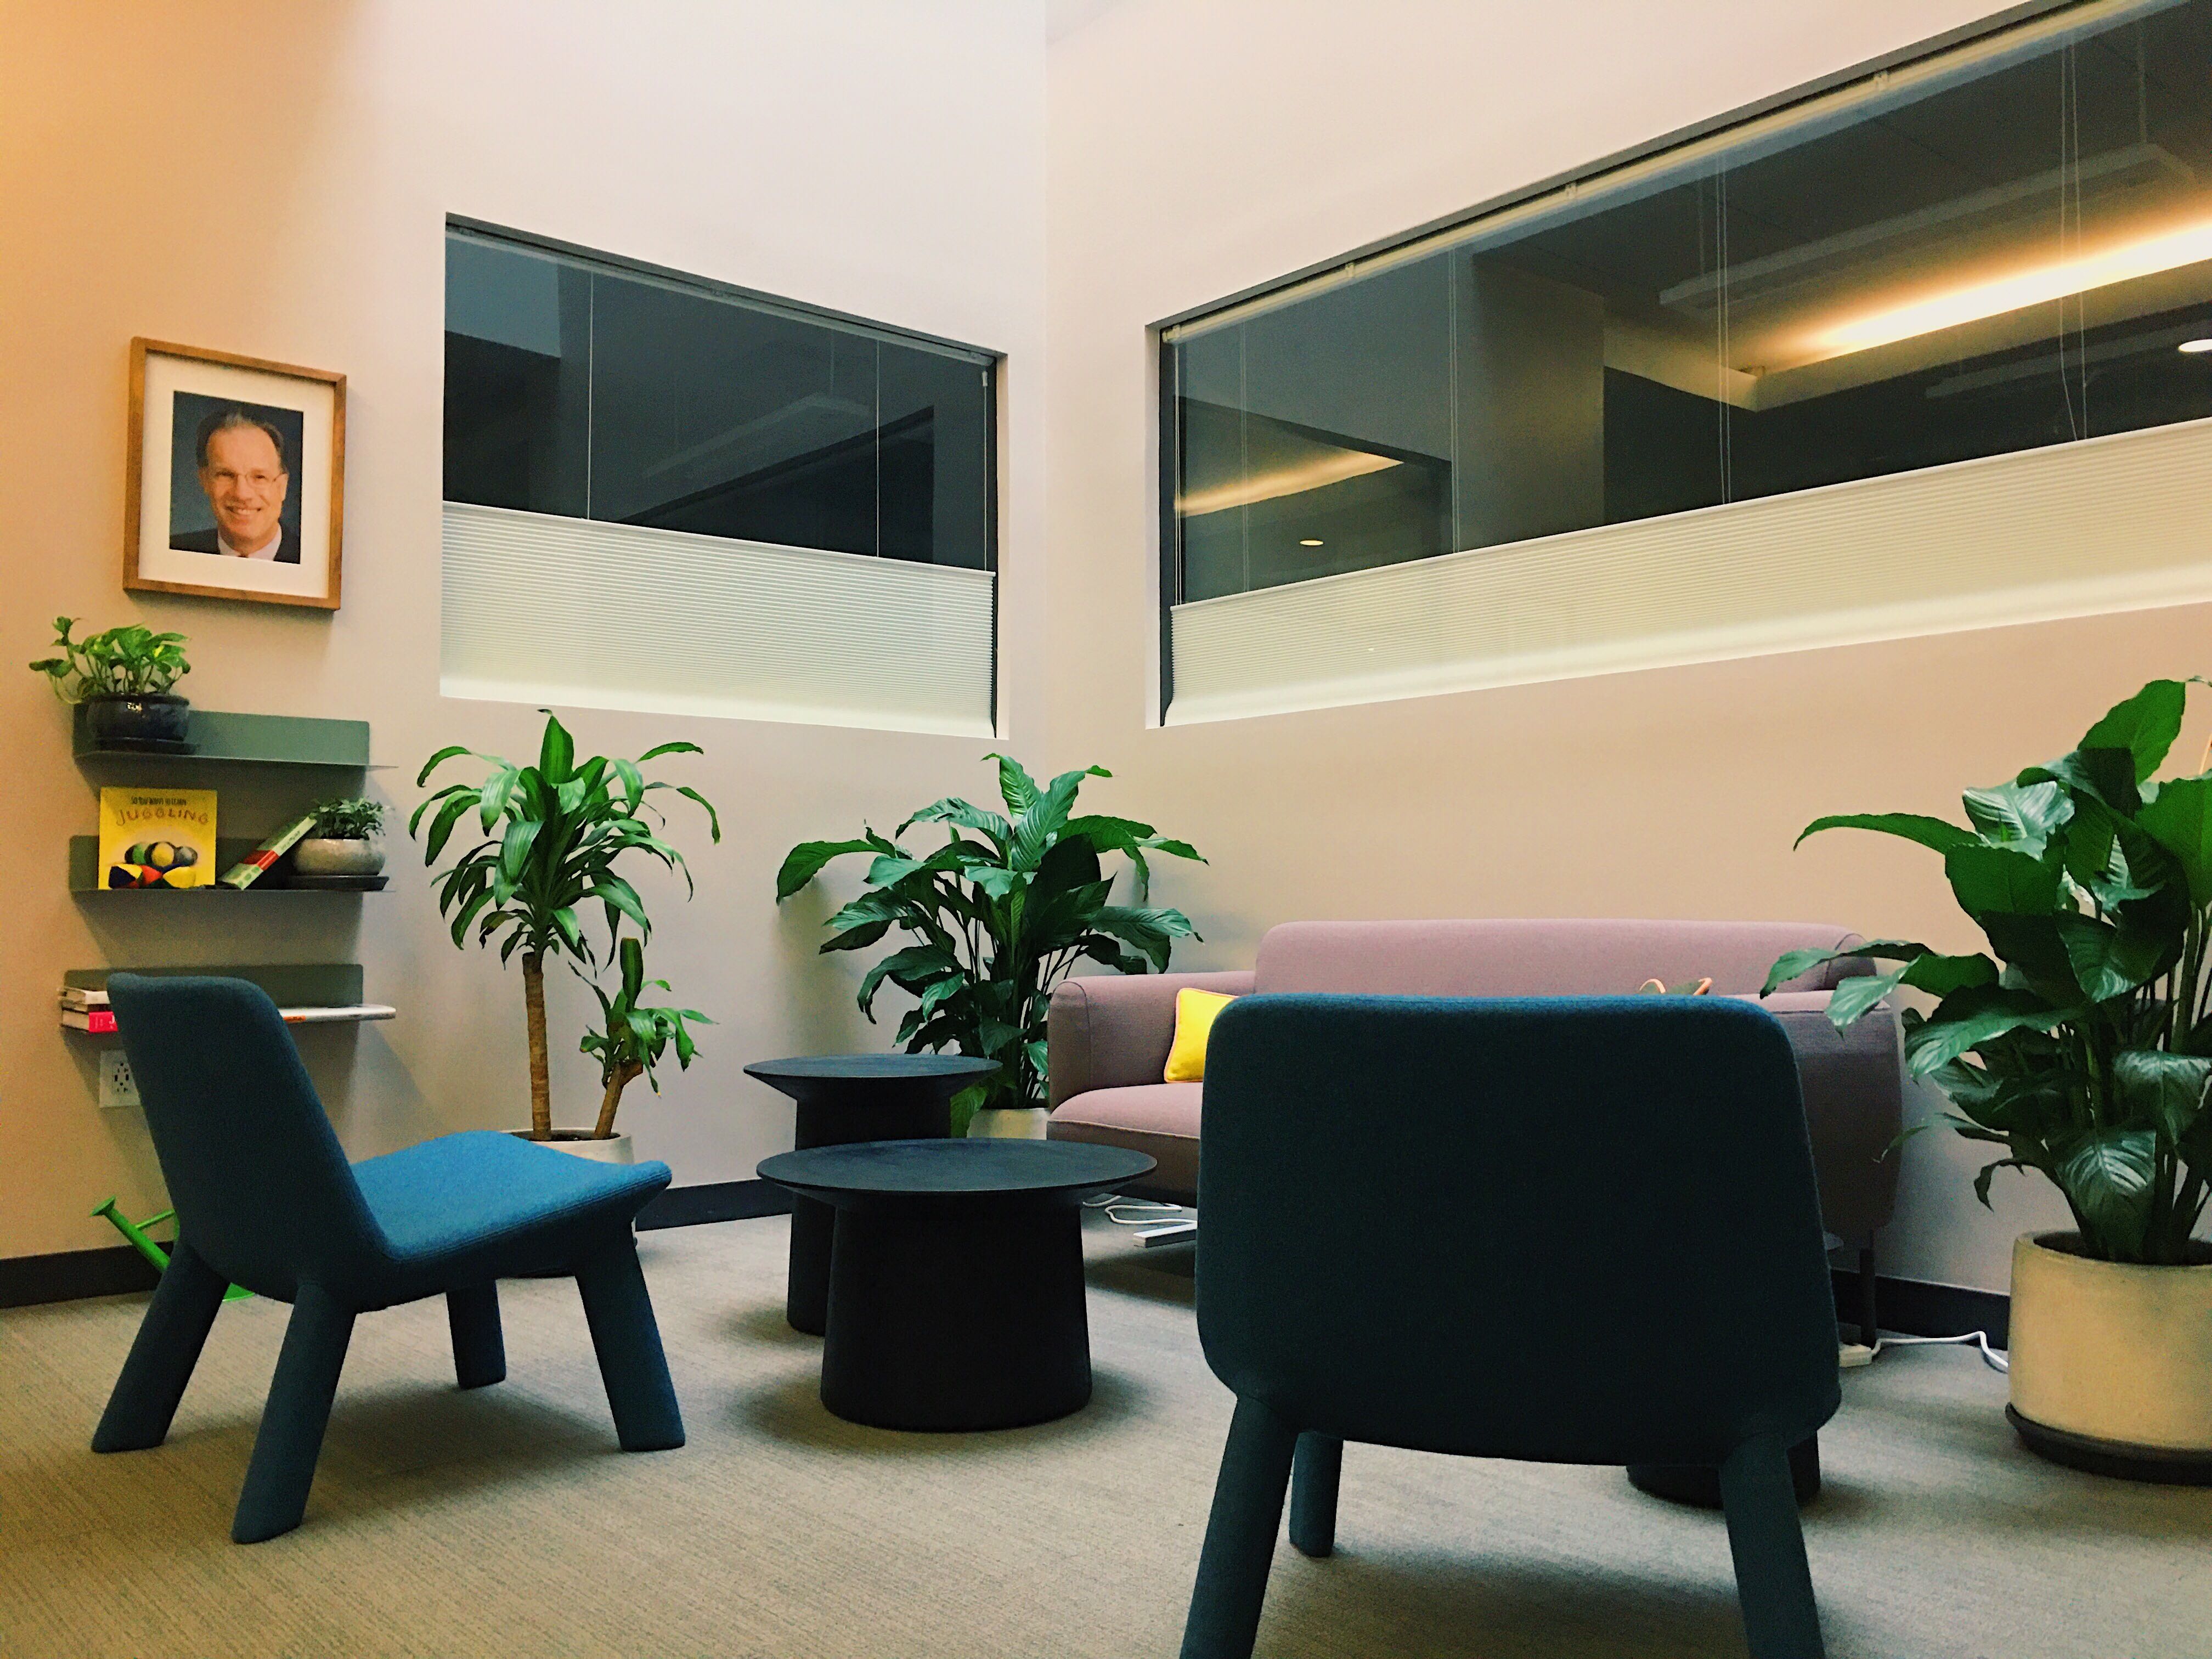 Corner of the Law School with plants, blue chairs, a purple couch, and a shelf of books. This is the John A. Robertson "alcove".